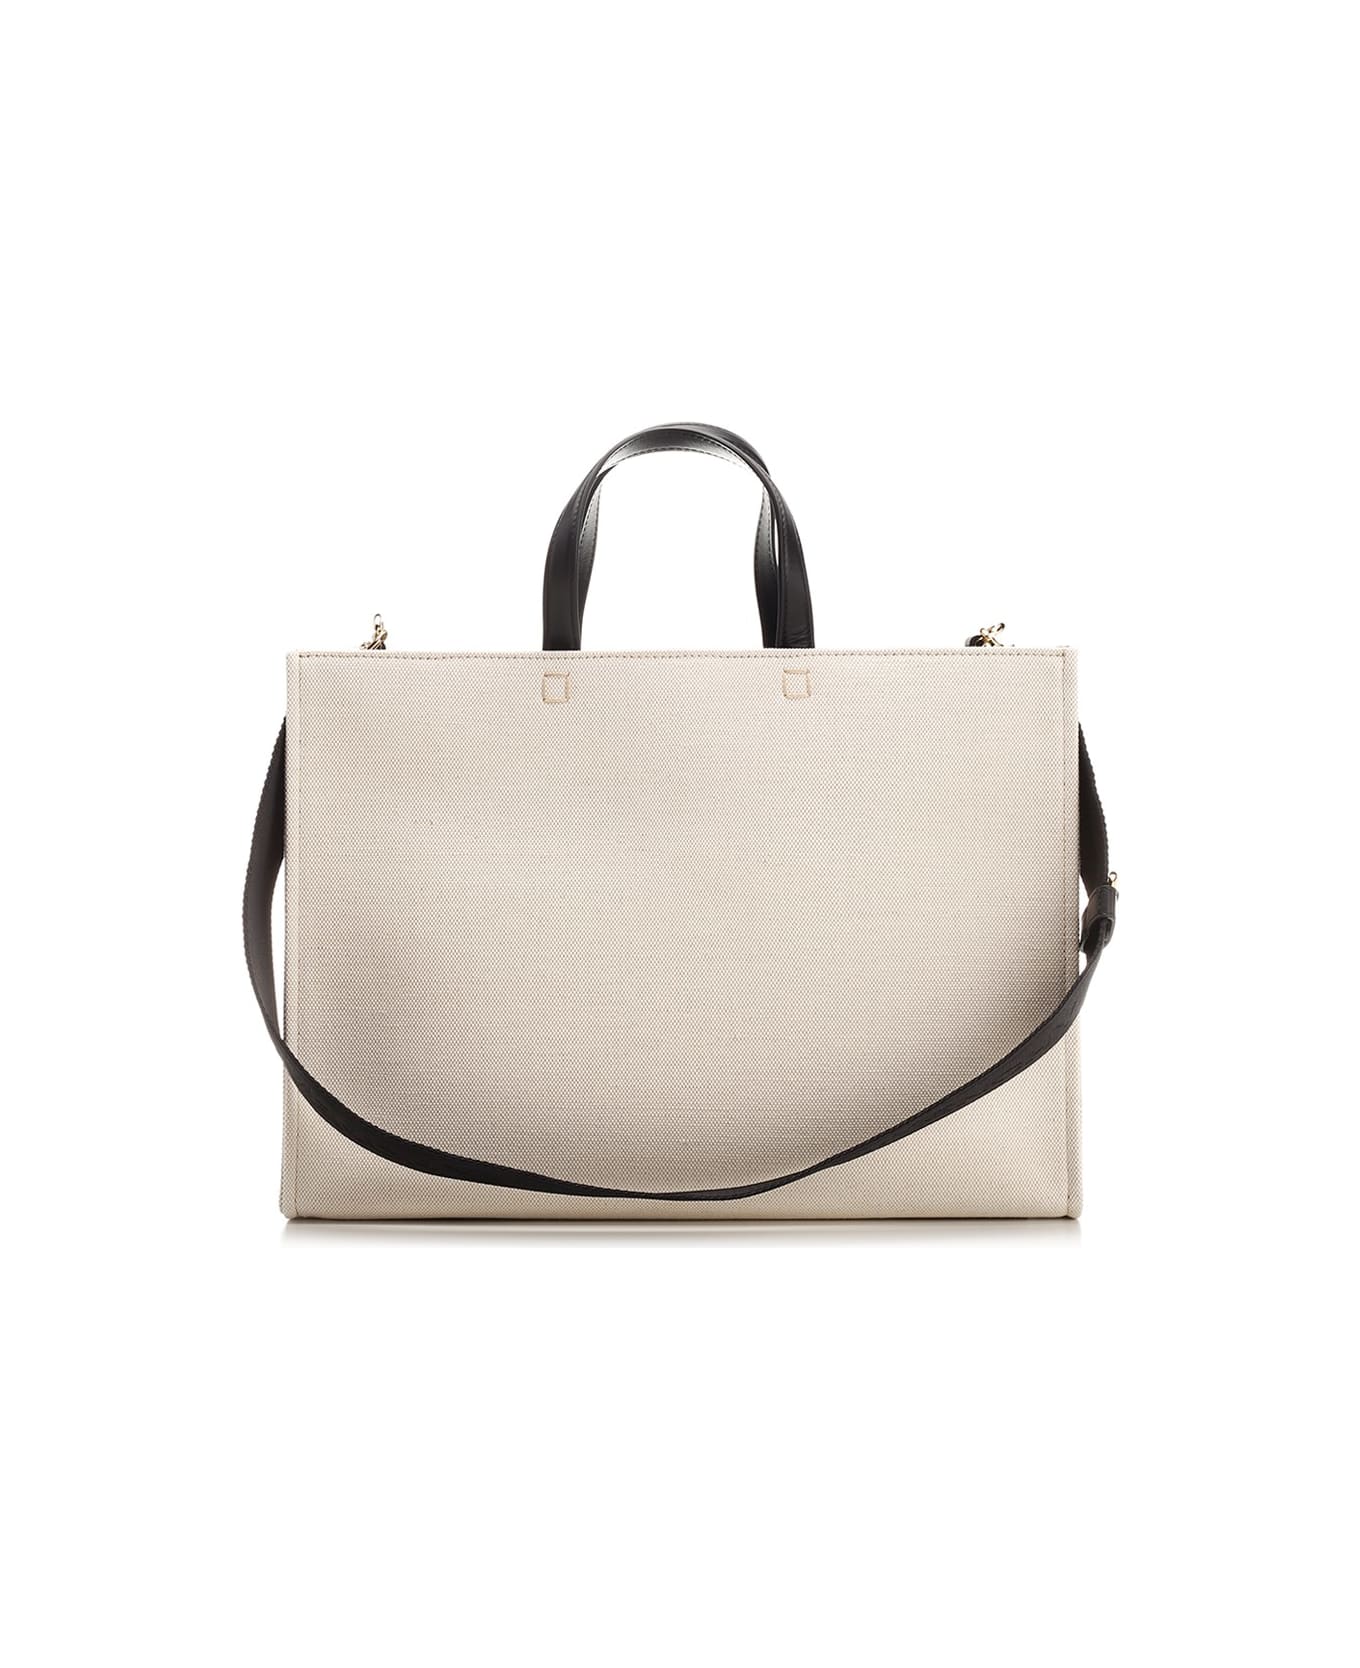 Givenchy G Tote Bag - White トートバッグ